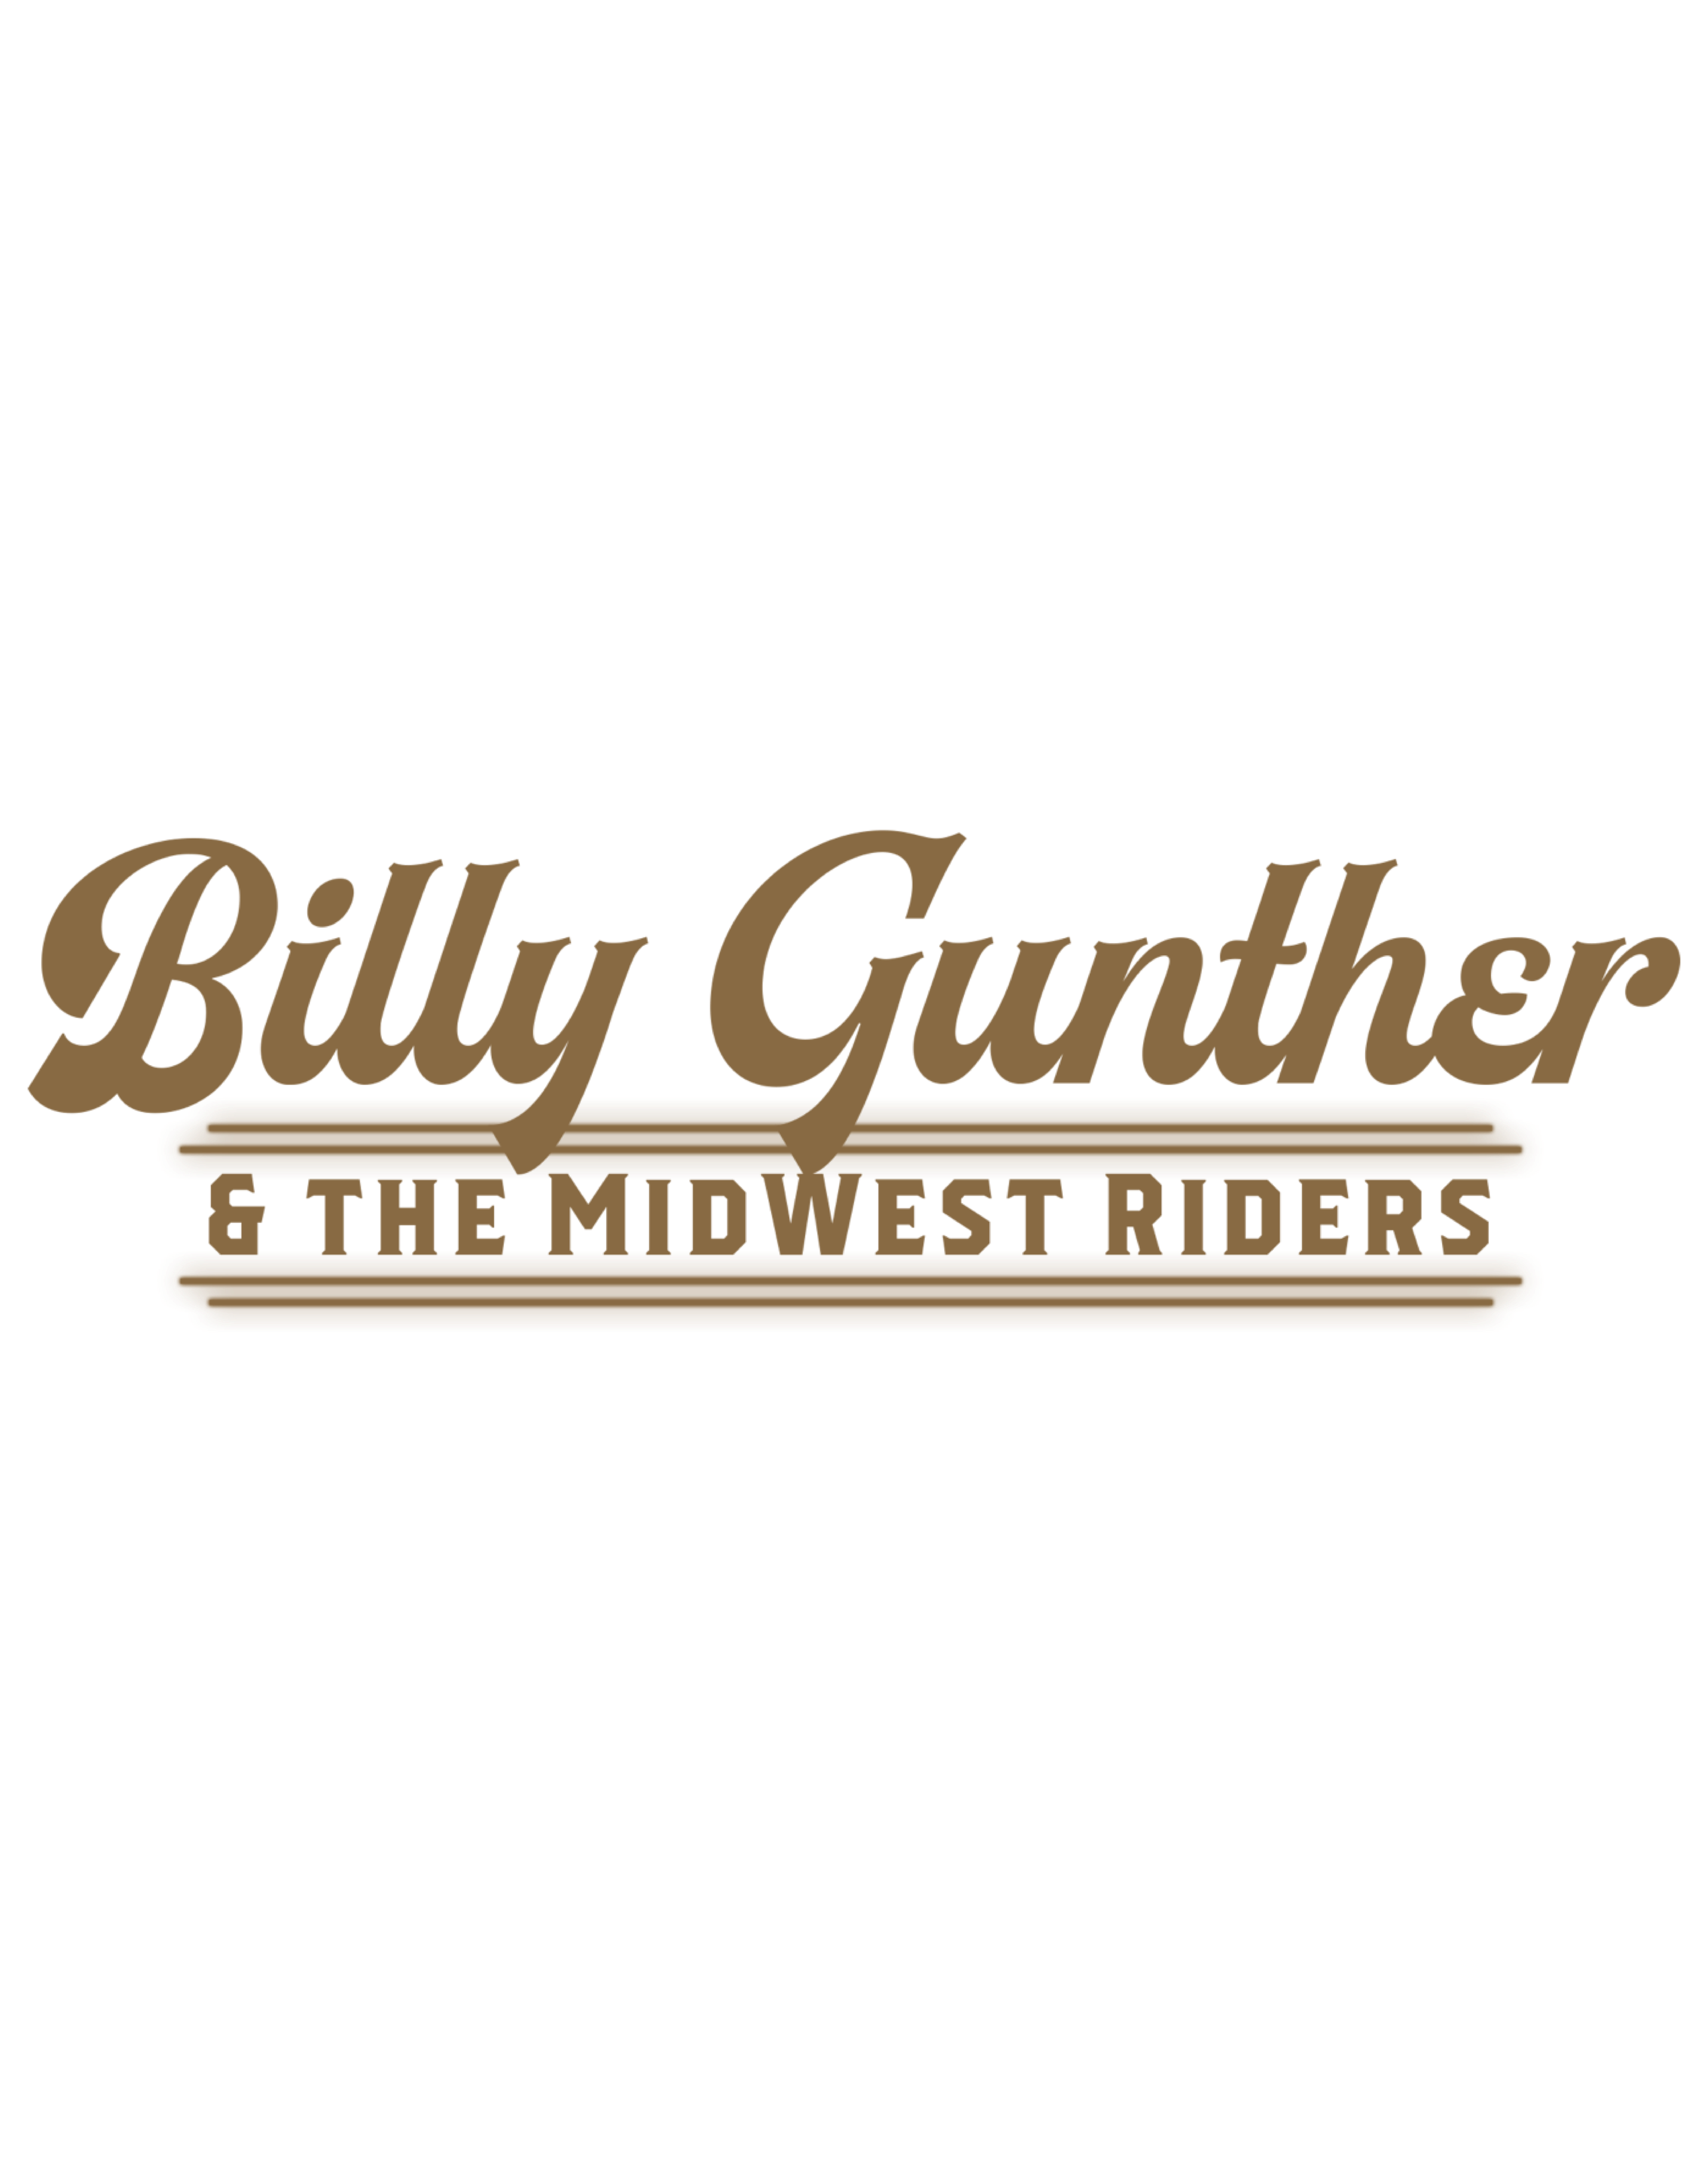 Billy Gunther & The Midwest Riders